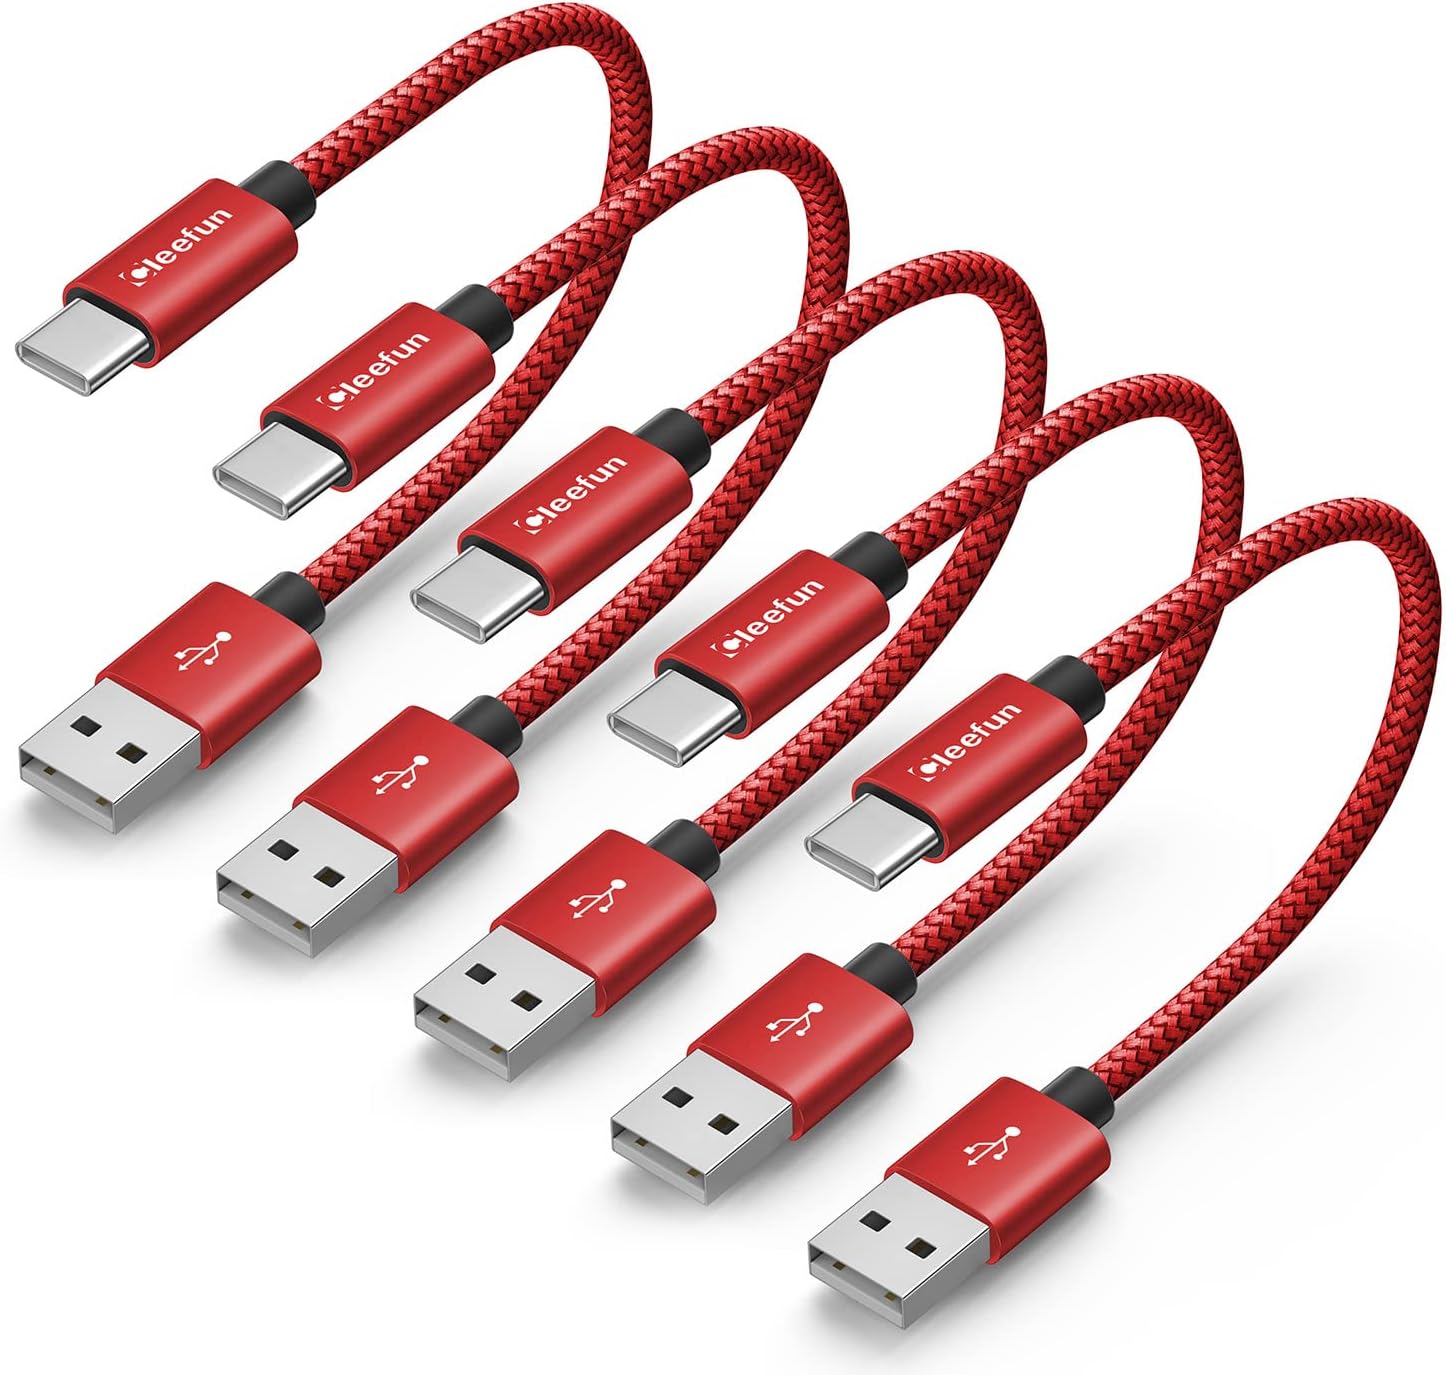 CLEEFUN [1ft, 5-Pack] Short USB C Cable Fast Charging, [...]